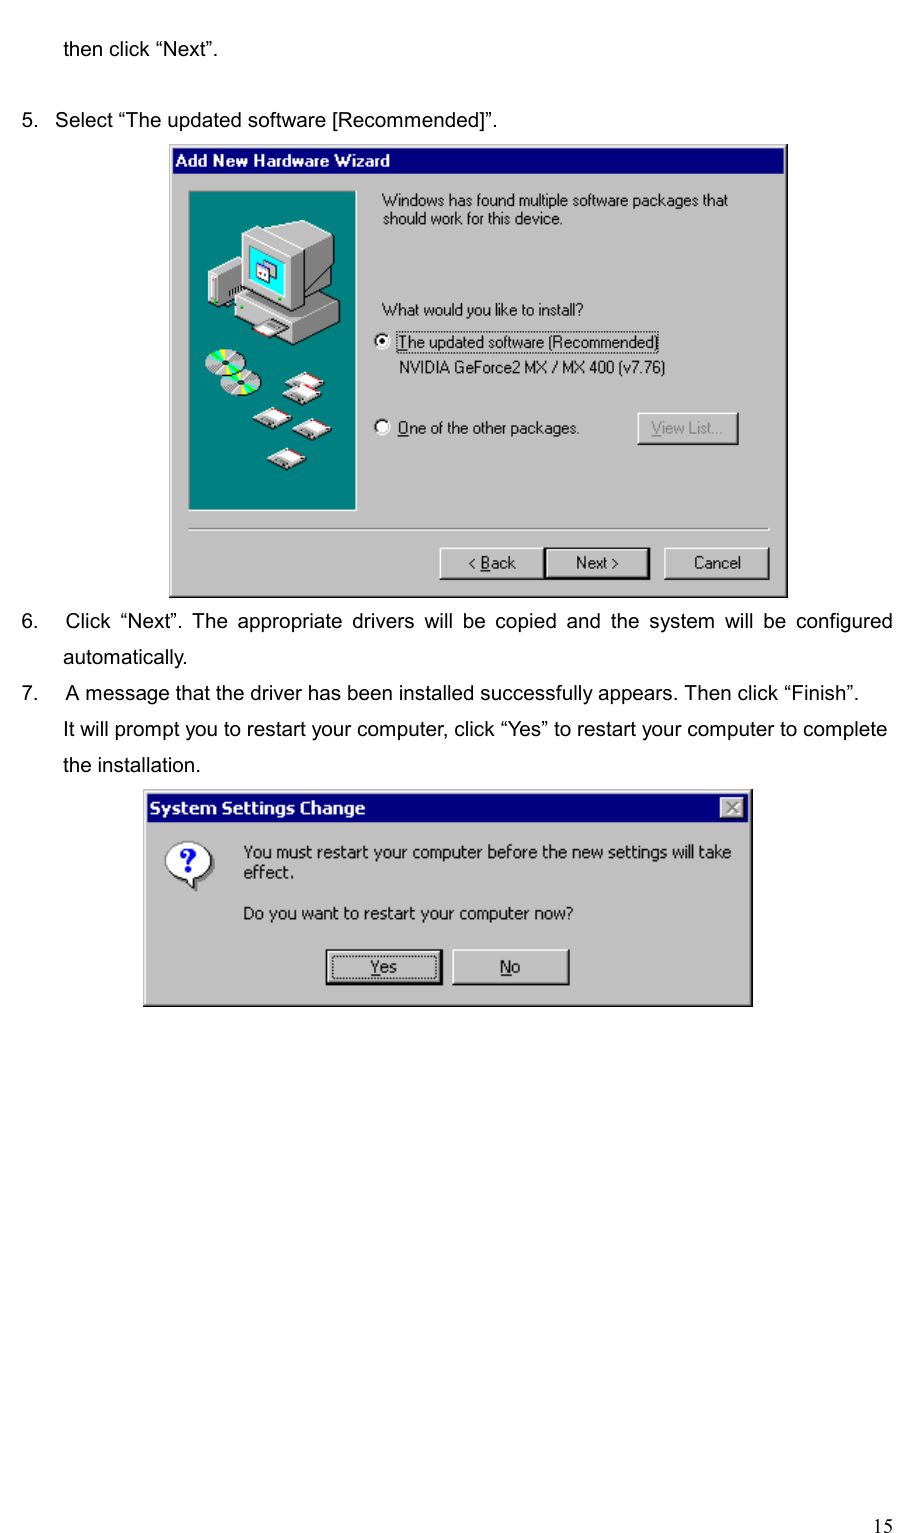     15 then click “Next”.  5.   Select “The updated software [Recommended]”.  6.   Click “Next”. The appropriate drivers will be copied and the system will be configured automatically. 7.     A message that the driver has been installed successfully appears. Then click “Finish”. It will prompt you to restart your computer, click “Yes” to restart your computer to complete   the installation.  